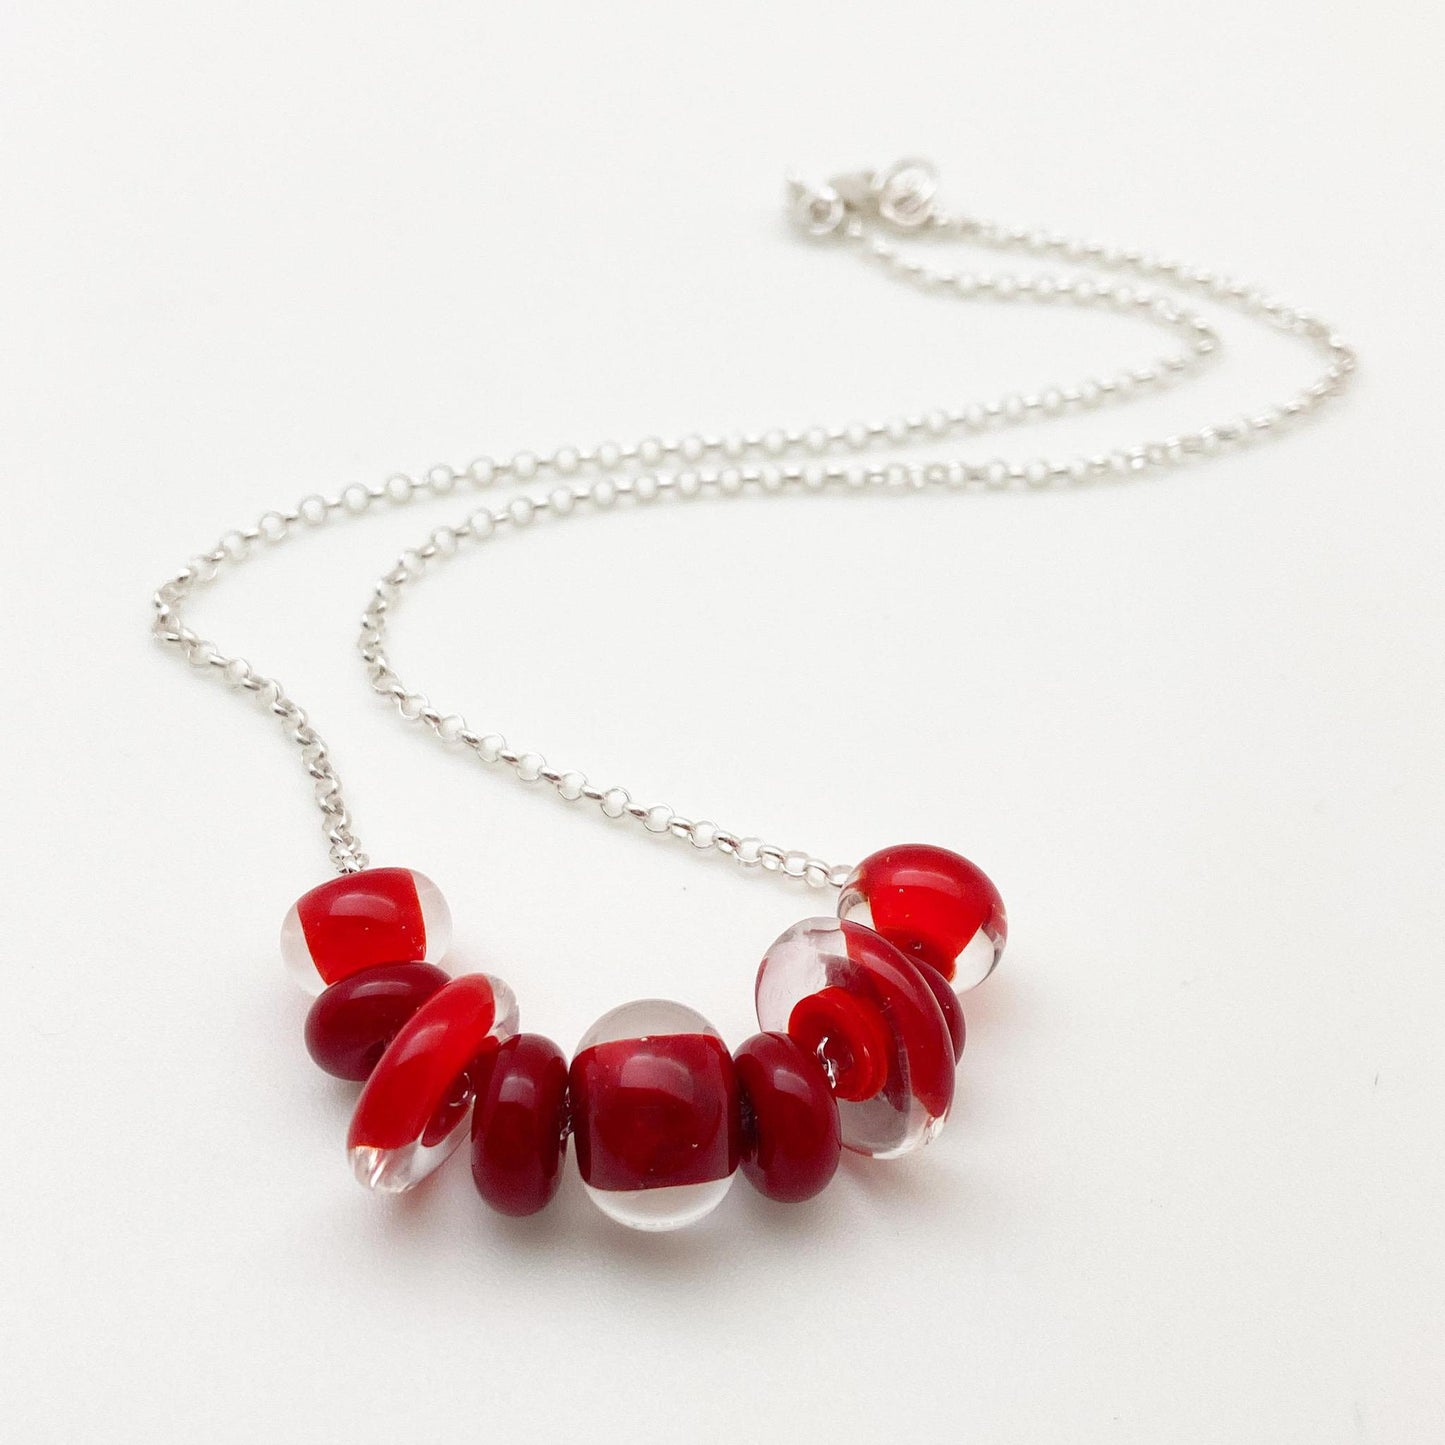 Necklace - Glass "Lifesaver" Beads - Bright Red